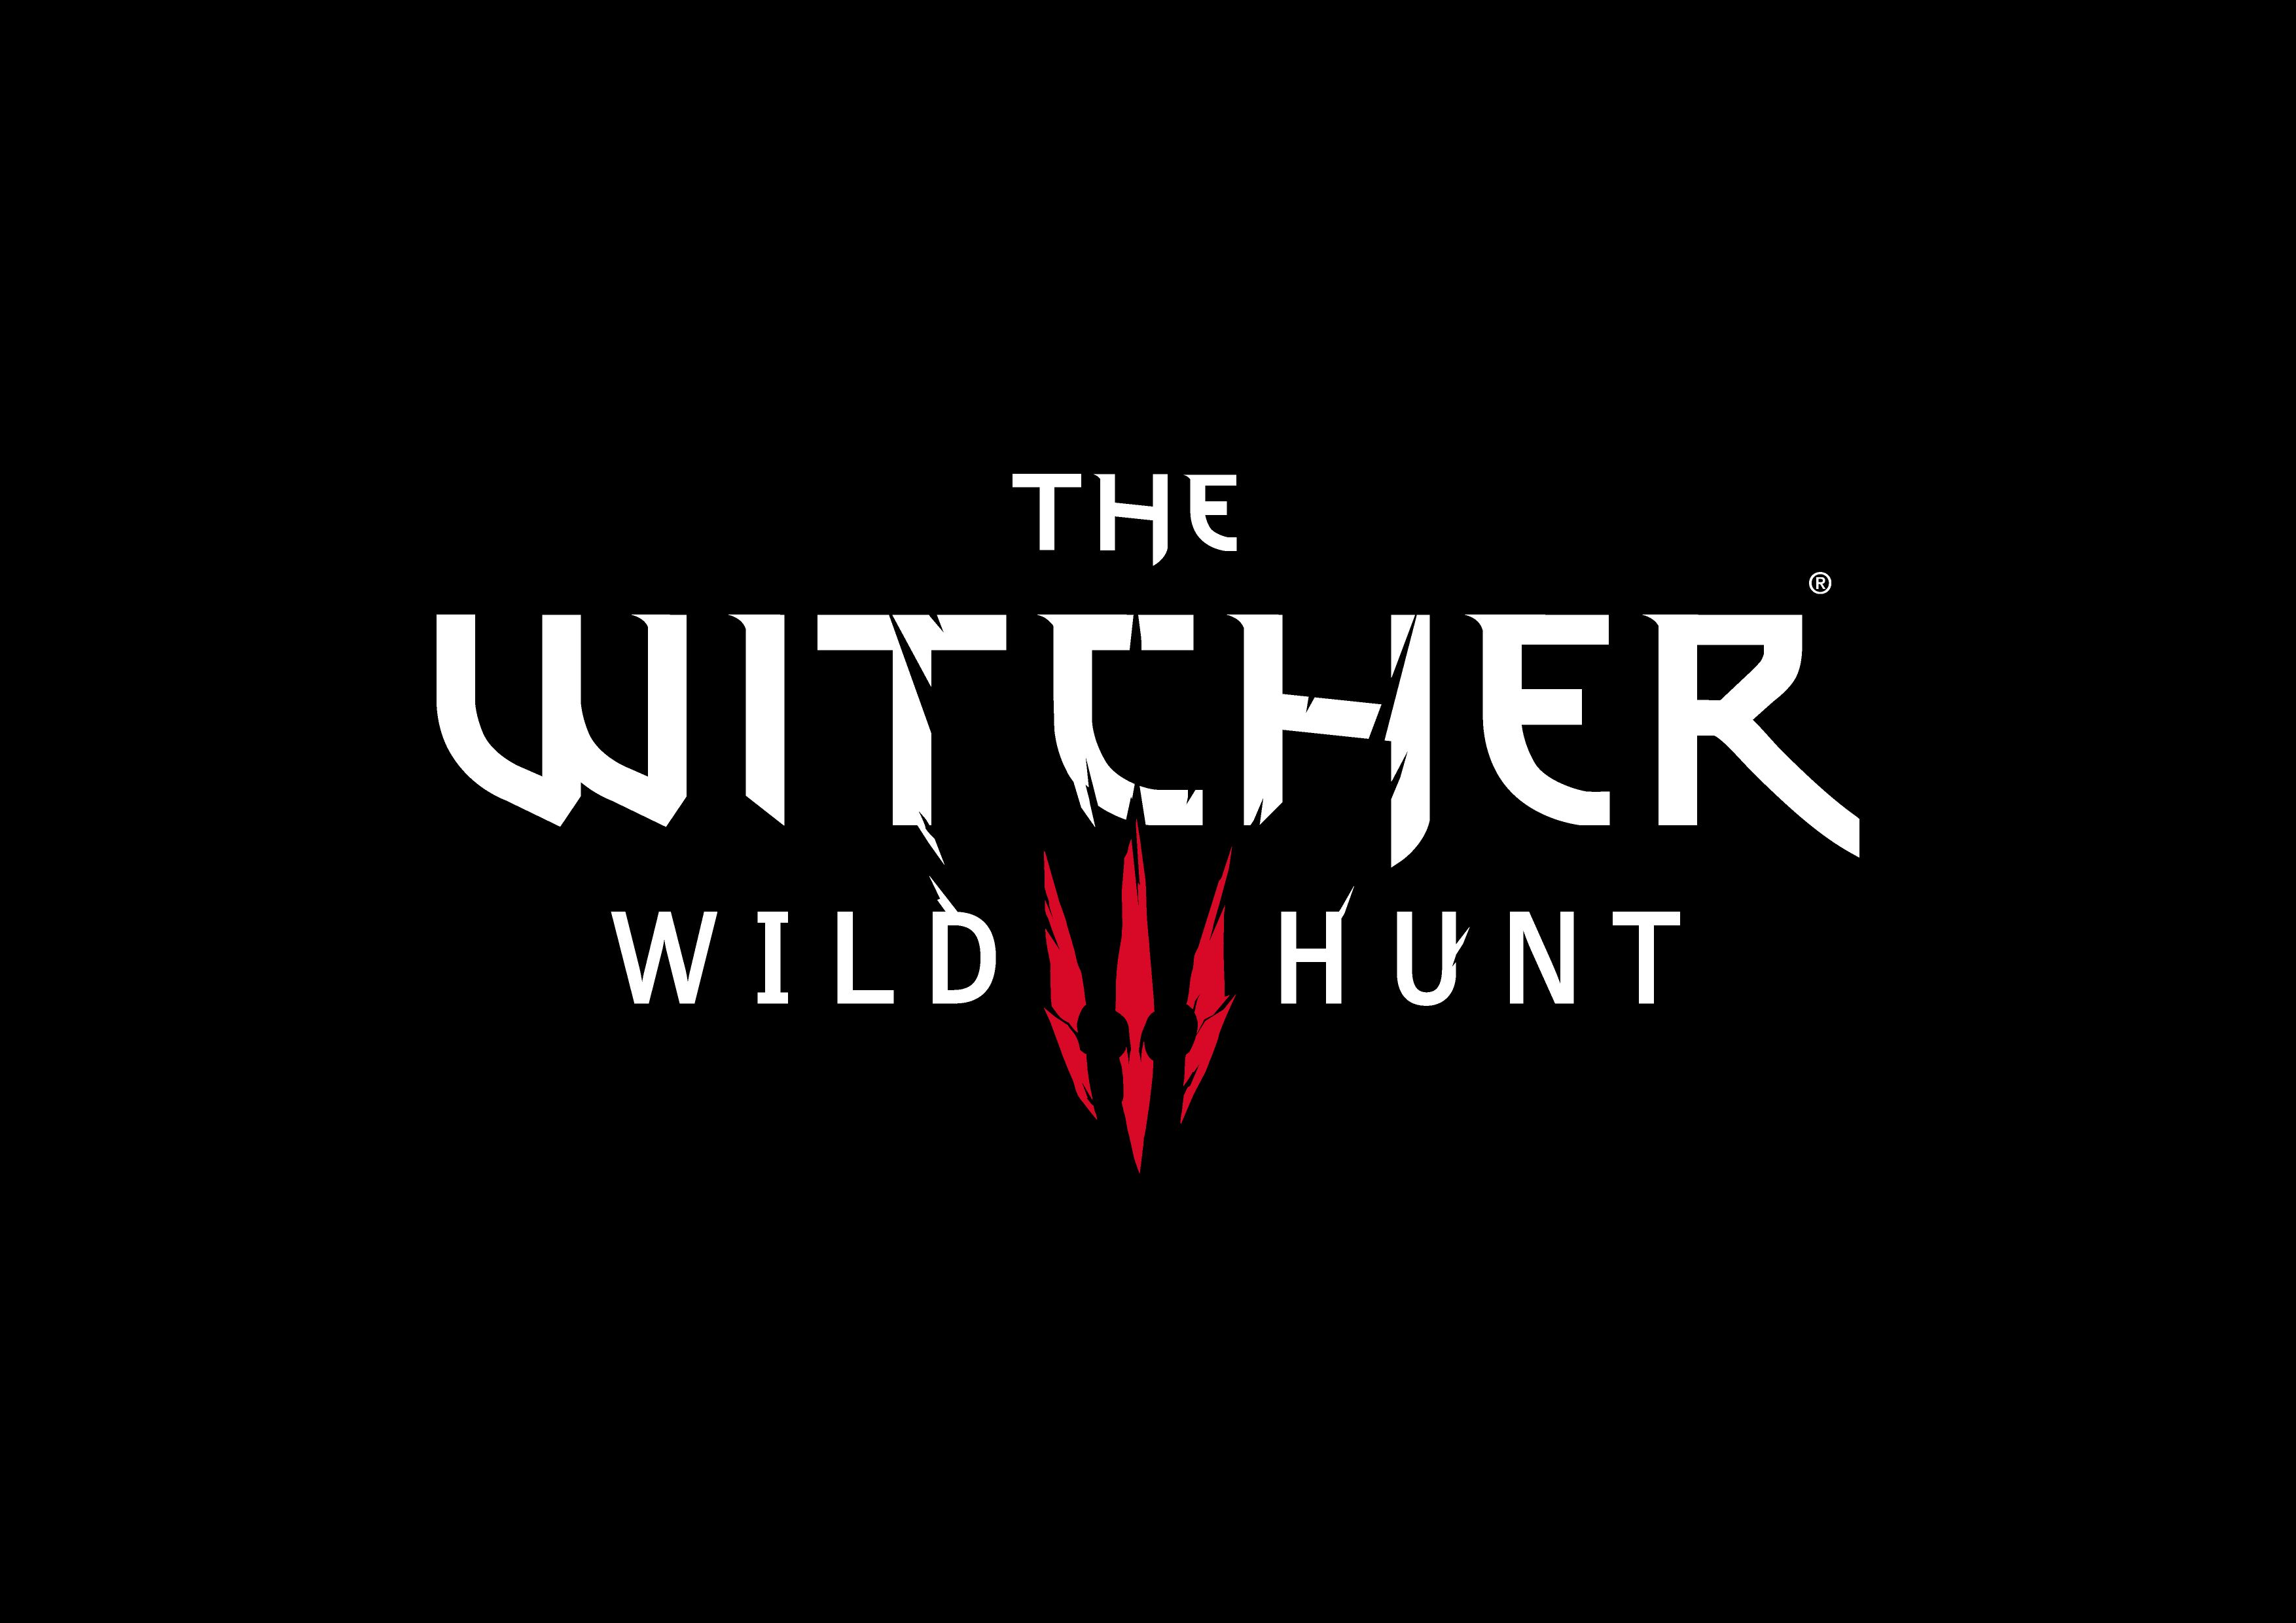 The witcher 3 theme music фото 25